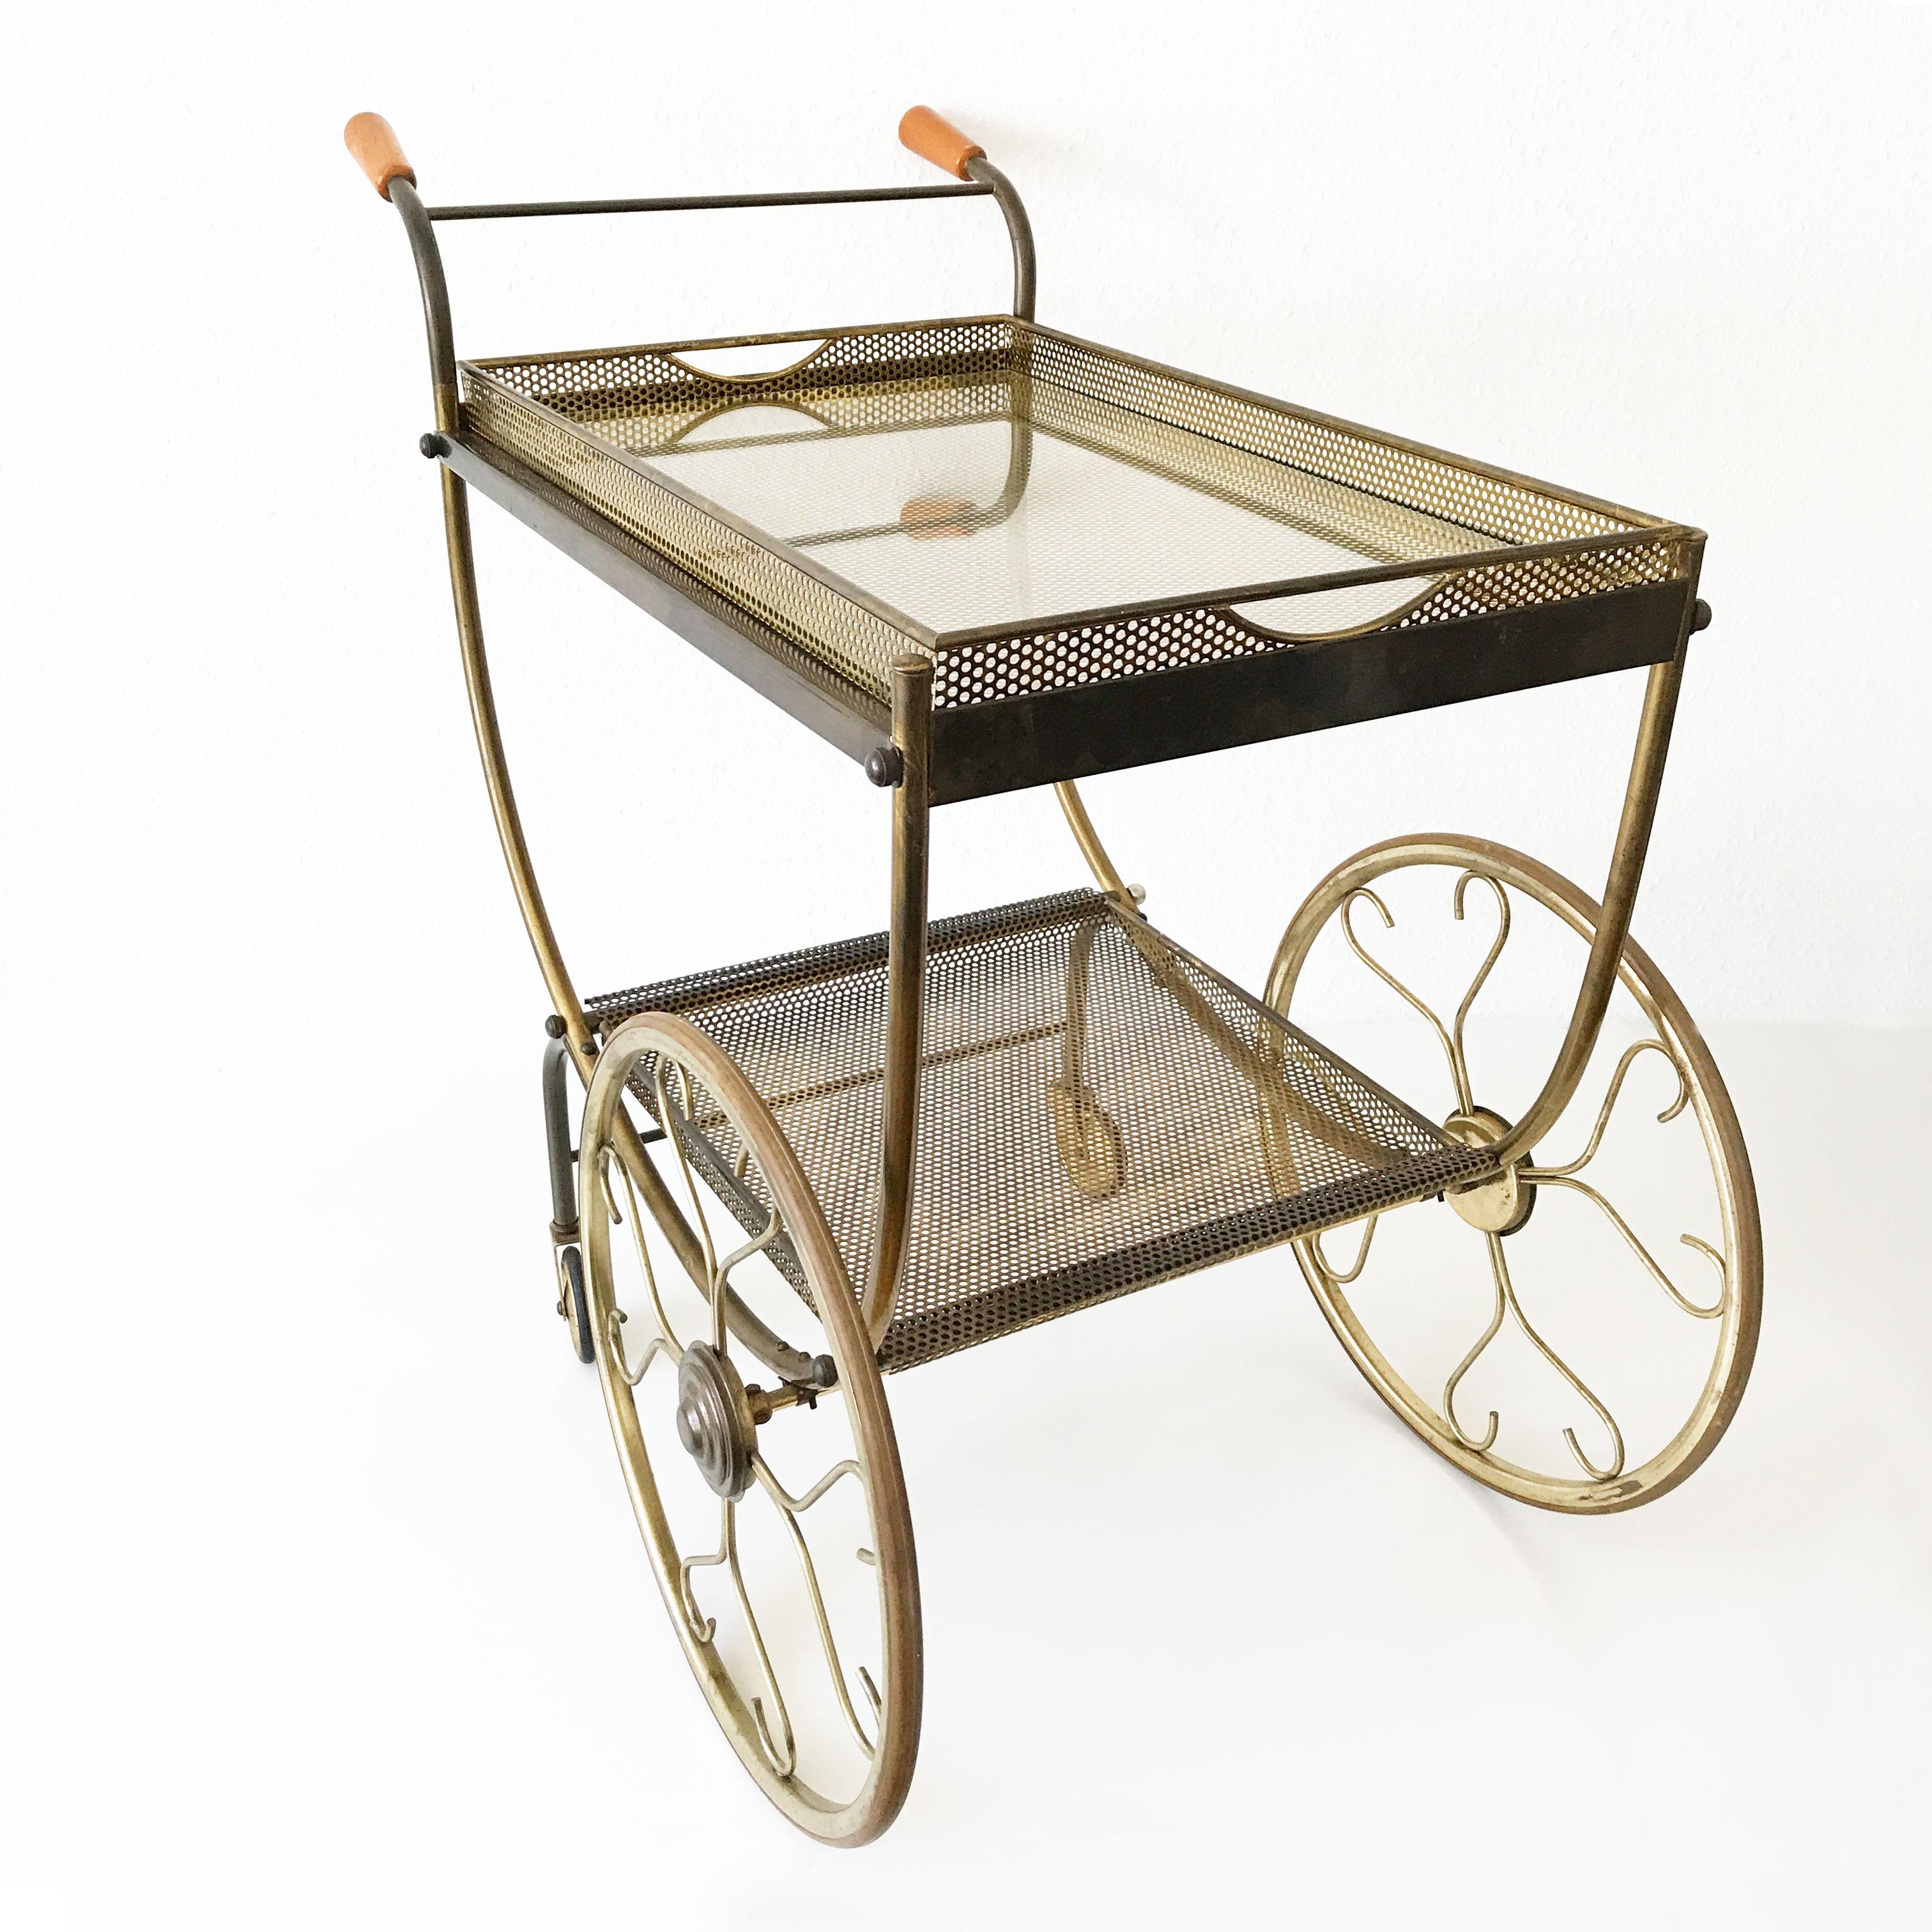 A rare and highly decorative Mid-Century Modern bar cart or tea trolley with elegant details and two removable serving plates. Designed and manufactured in 1950s by Svenskt Tenn, Sweden.

Executed in brass sheet and tubes, wood and glass plate.